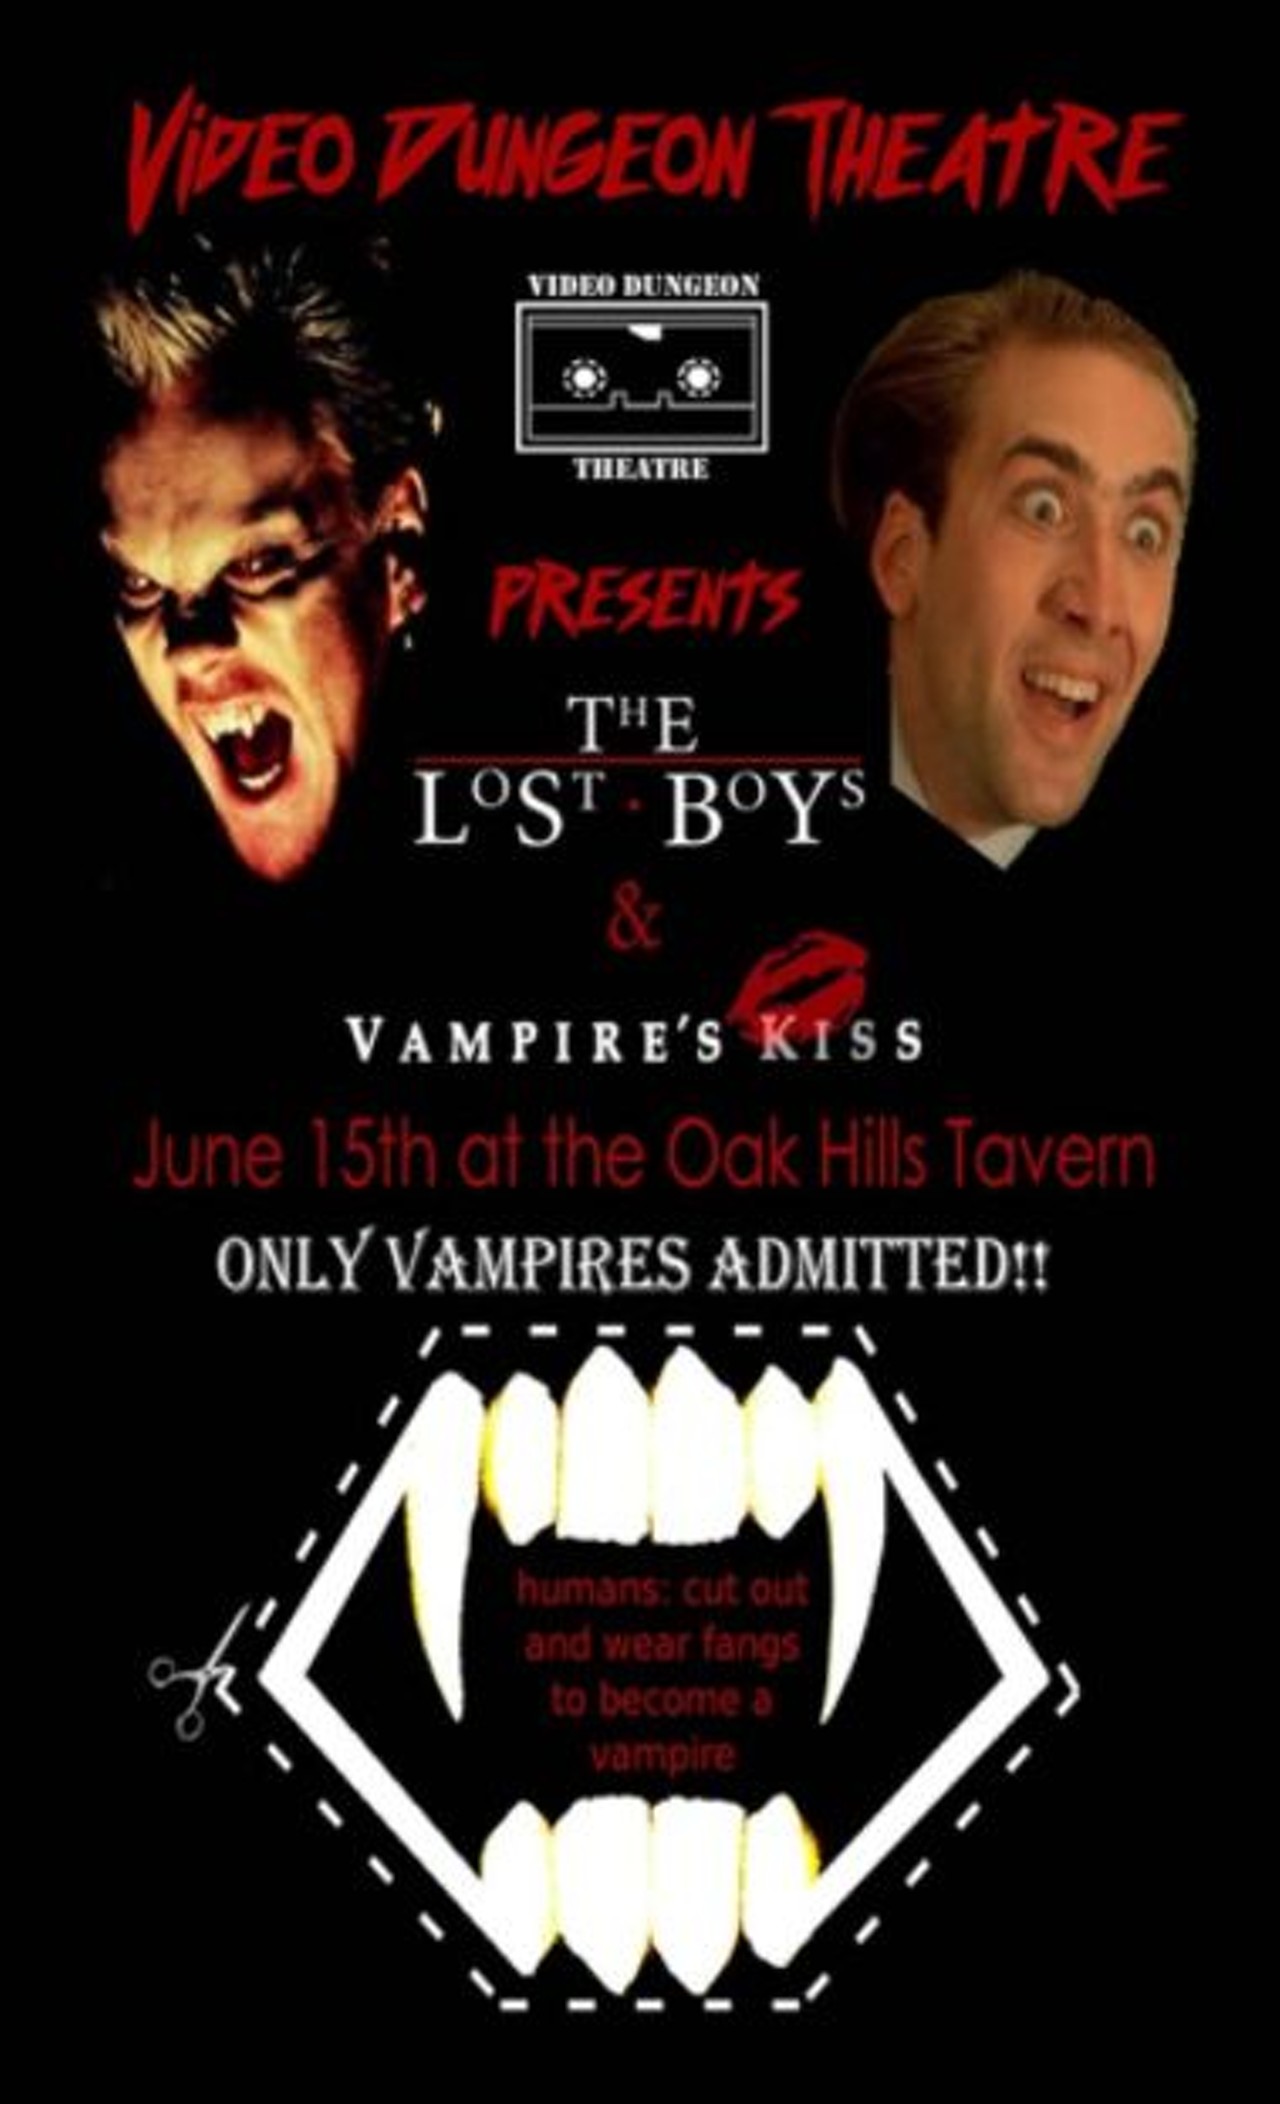 Vampire&#146;s Kiss & The Lost Boys 
Thu., June 15, 9 p.m.-1 a.m. Free.